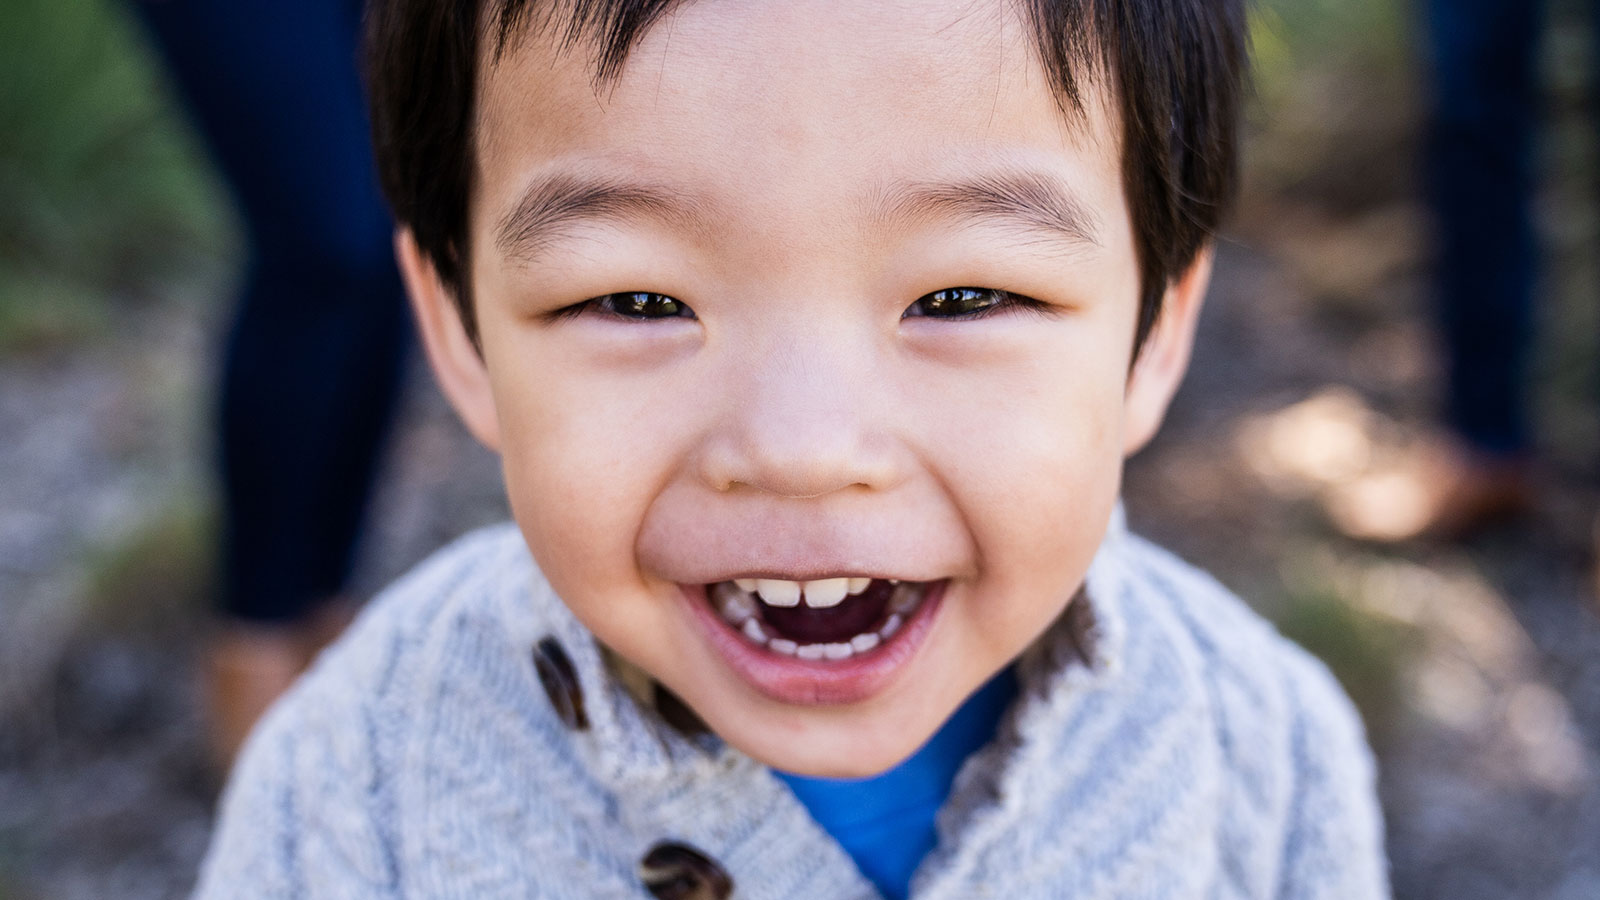 boy adopted from korea smiling close to camera